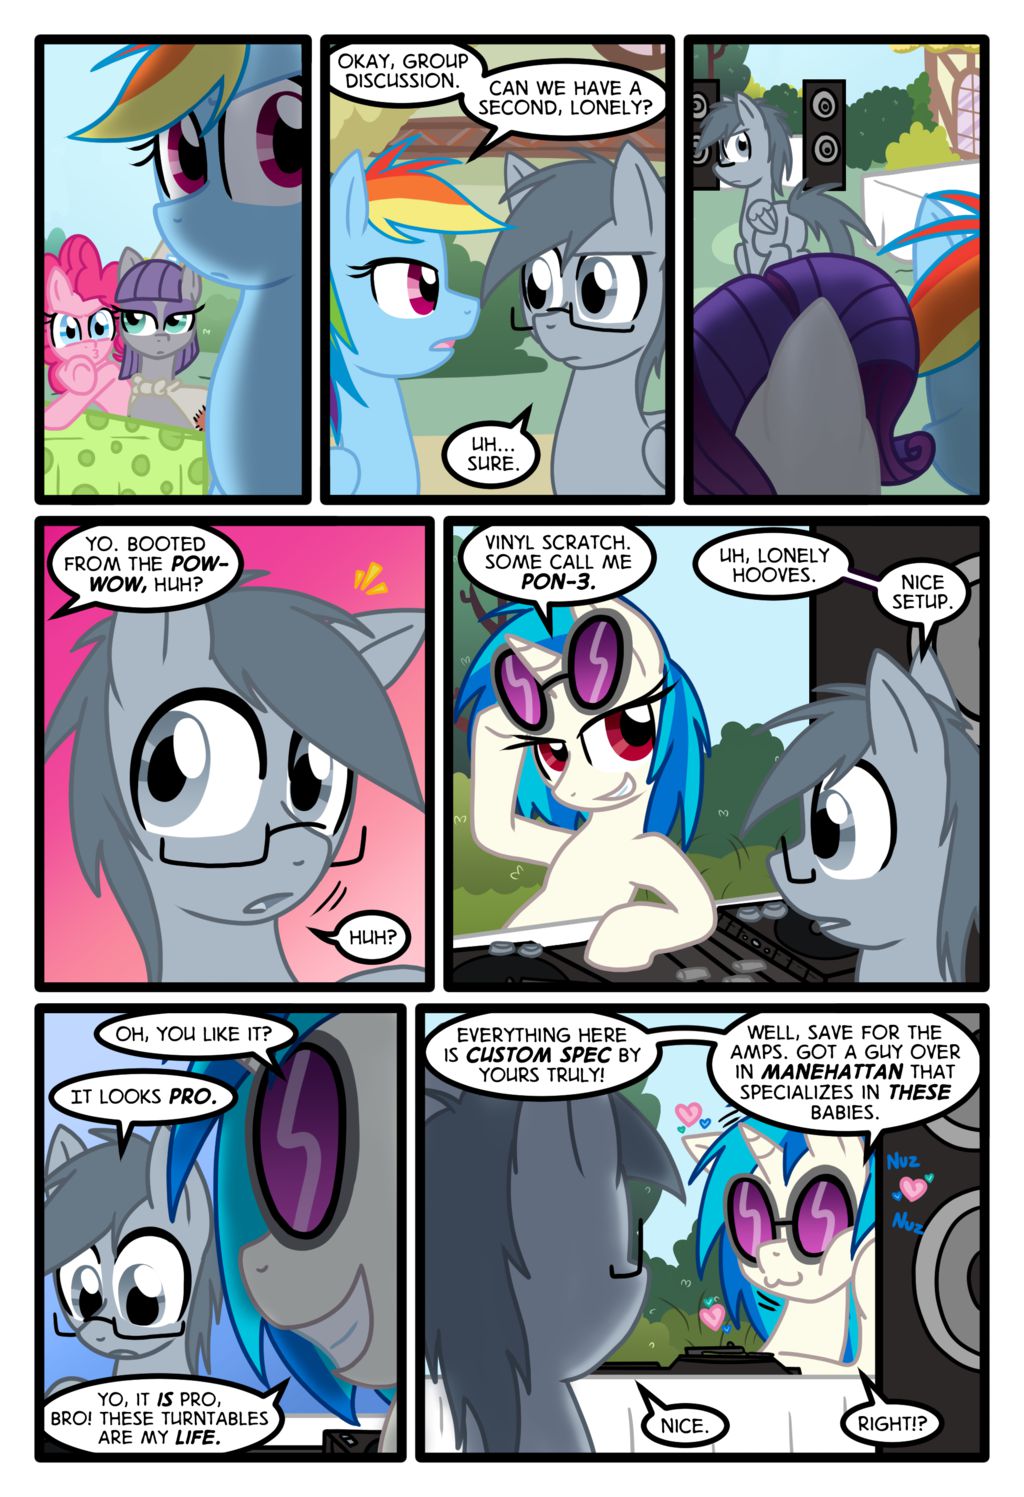 [Zaron] Lonely Hooves (My Little Pony: Friendship is Magic) [English] [Ongoing] 52